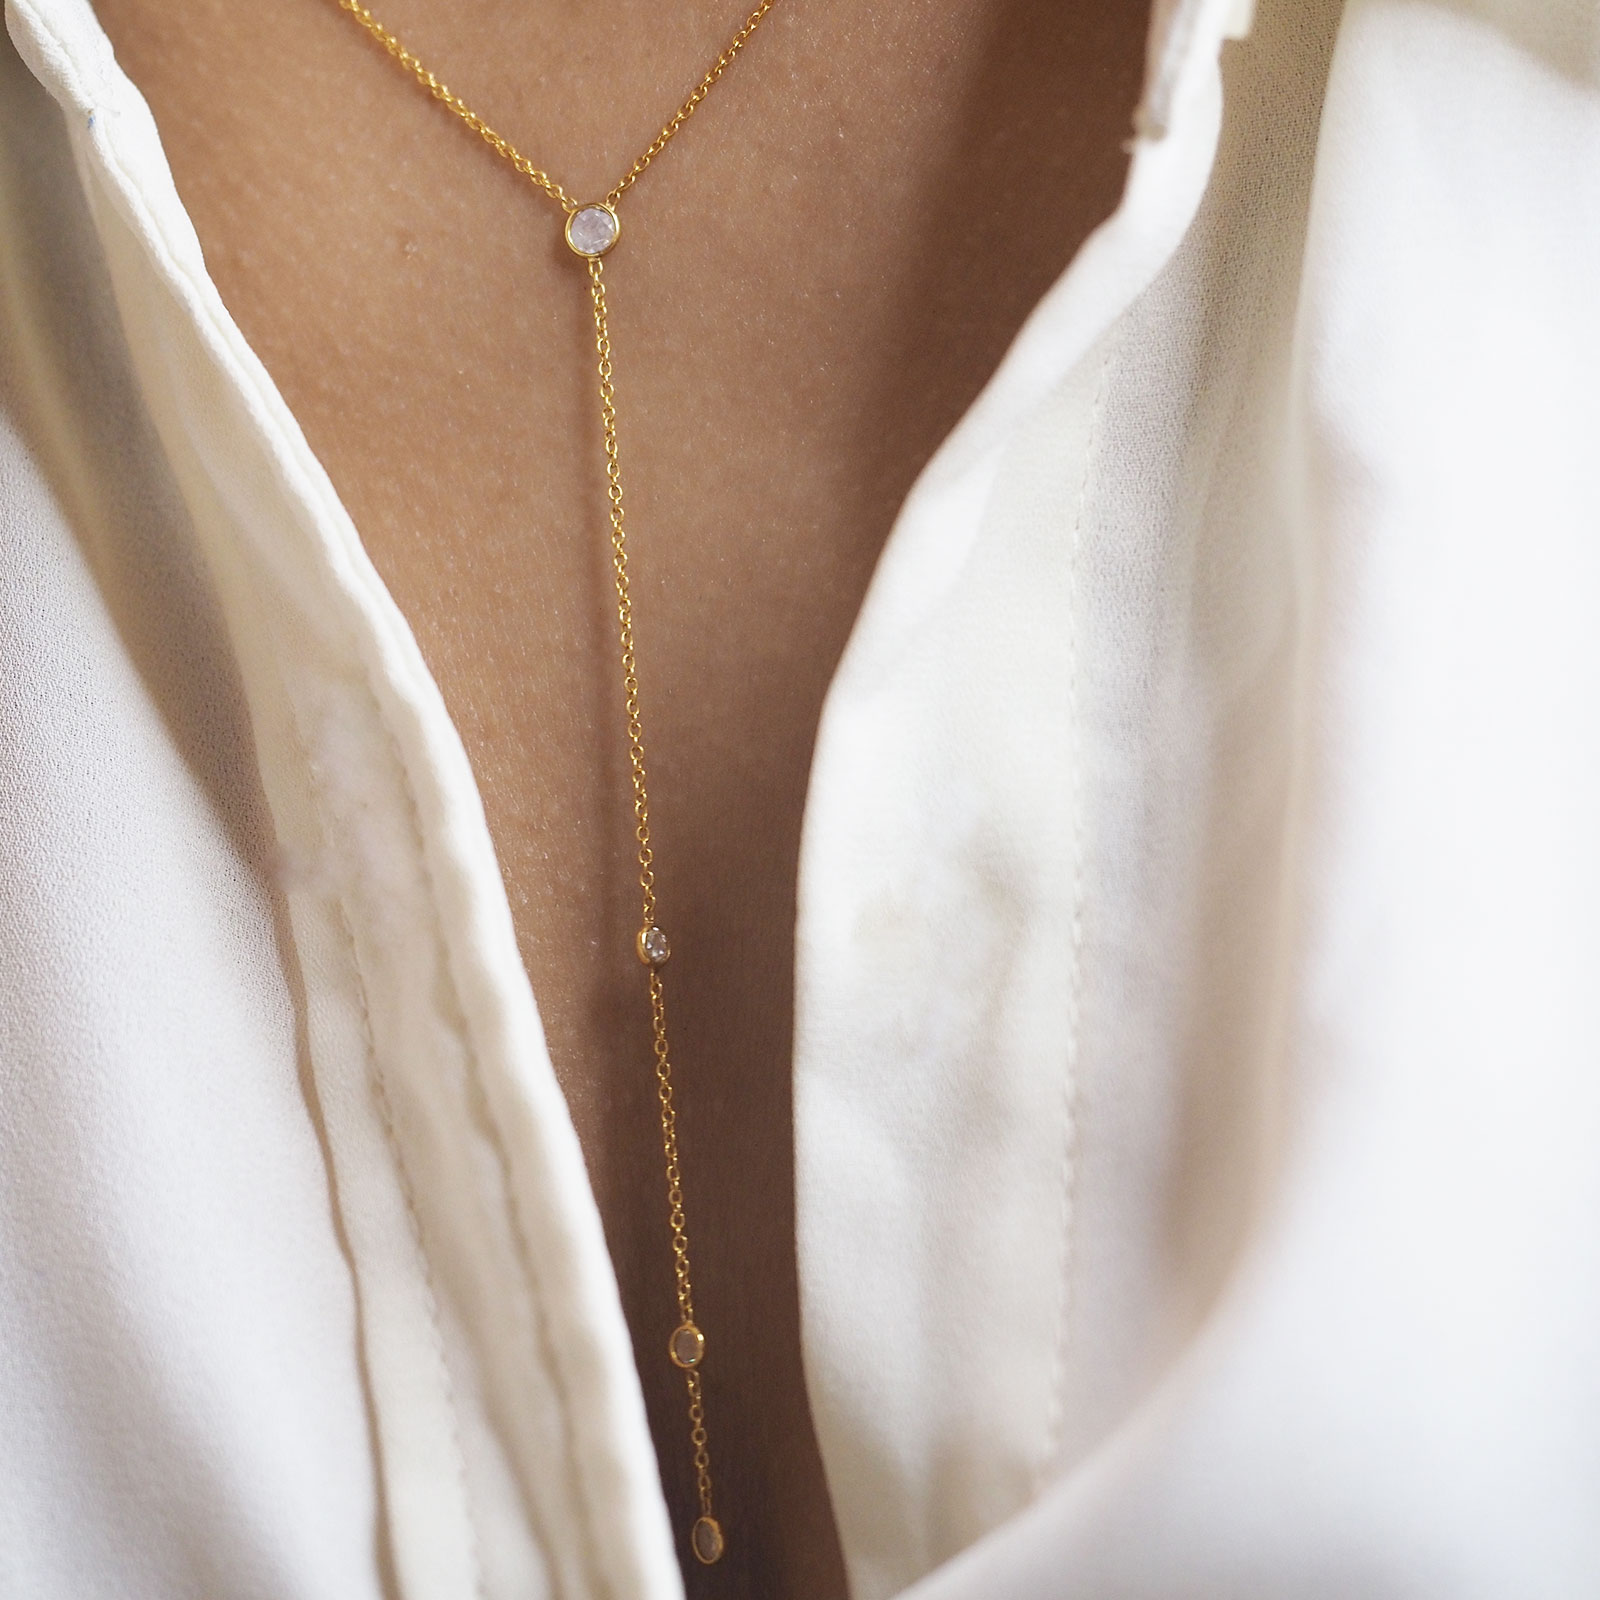 Yellow Gold Lariat Necklace, Rock & Pearl | Birks Iconic-vachngandaiphat.com.vn